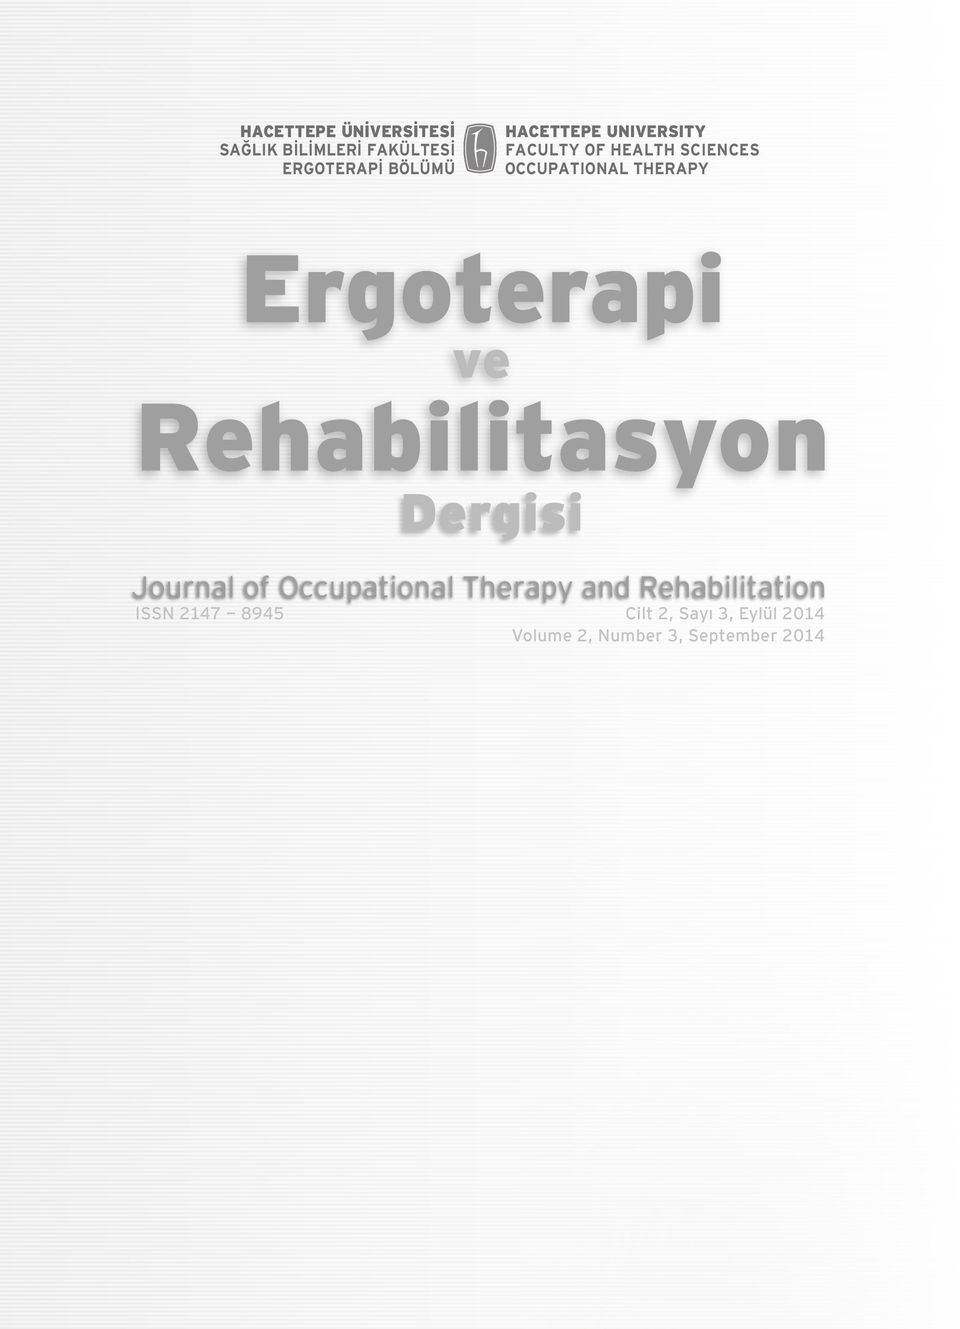 Ergoterapi ve Rehabilitasyon Dergisi Journal of Occupational Therapy and